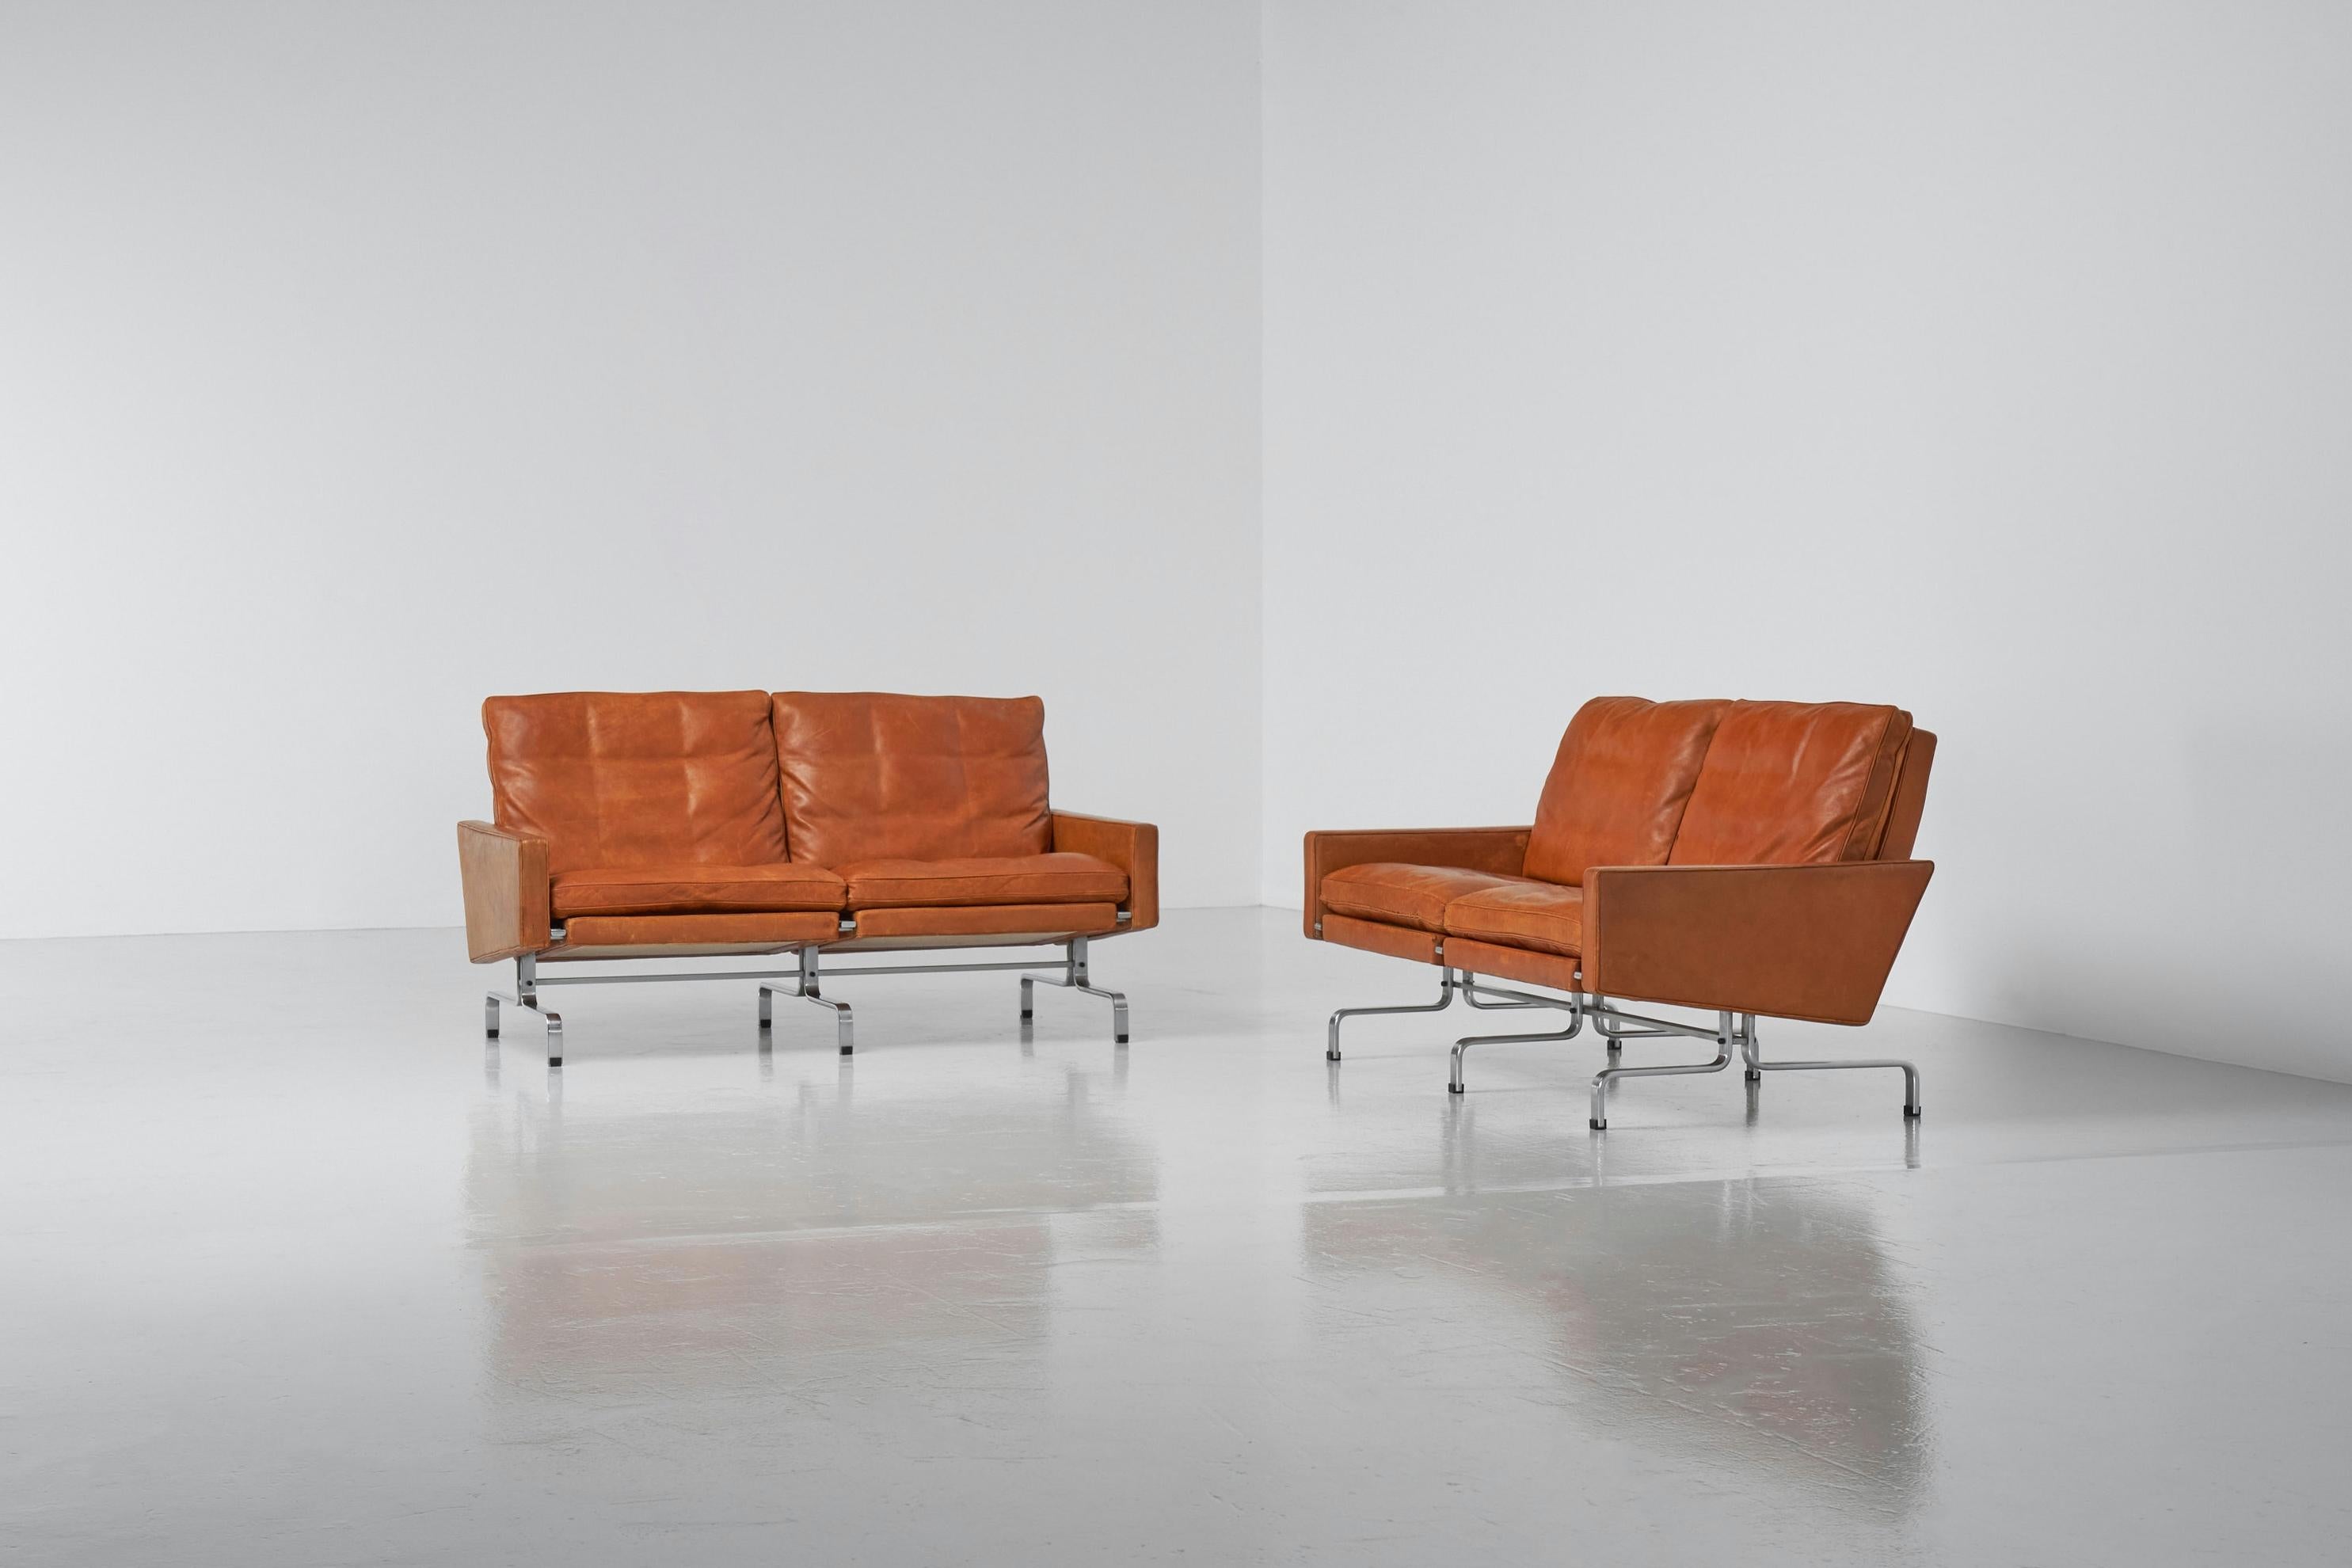 Amazing matching pair of sofas designed by Poul Kjaerholm and manufactured by Ejvind Kold Christensen, Denmark 1957. The PK 31 was both a lounge chair and a modular seating element that could be joined in groups to create a variable length. Two